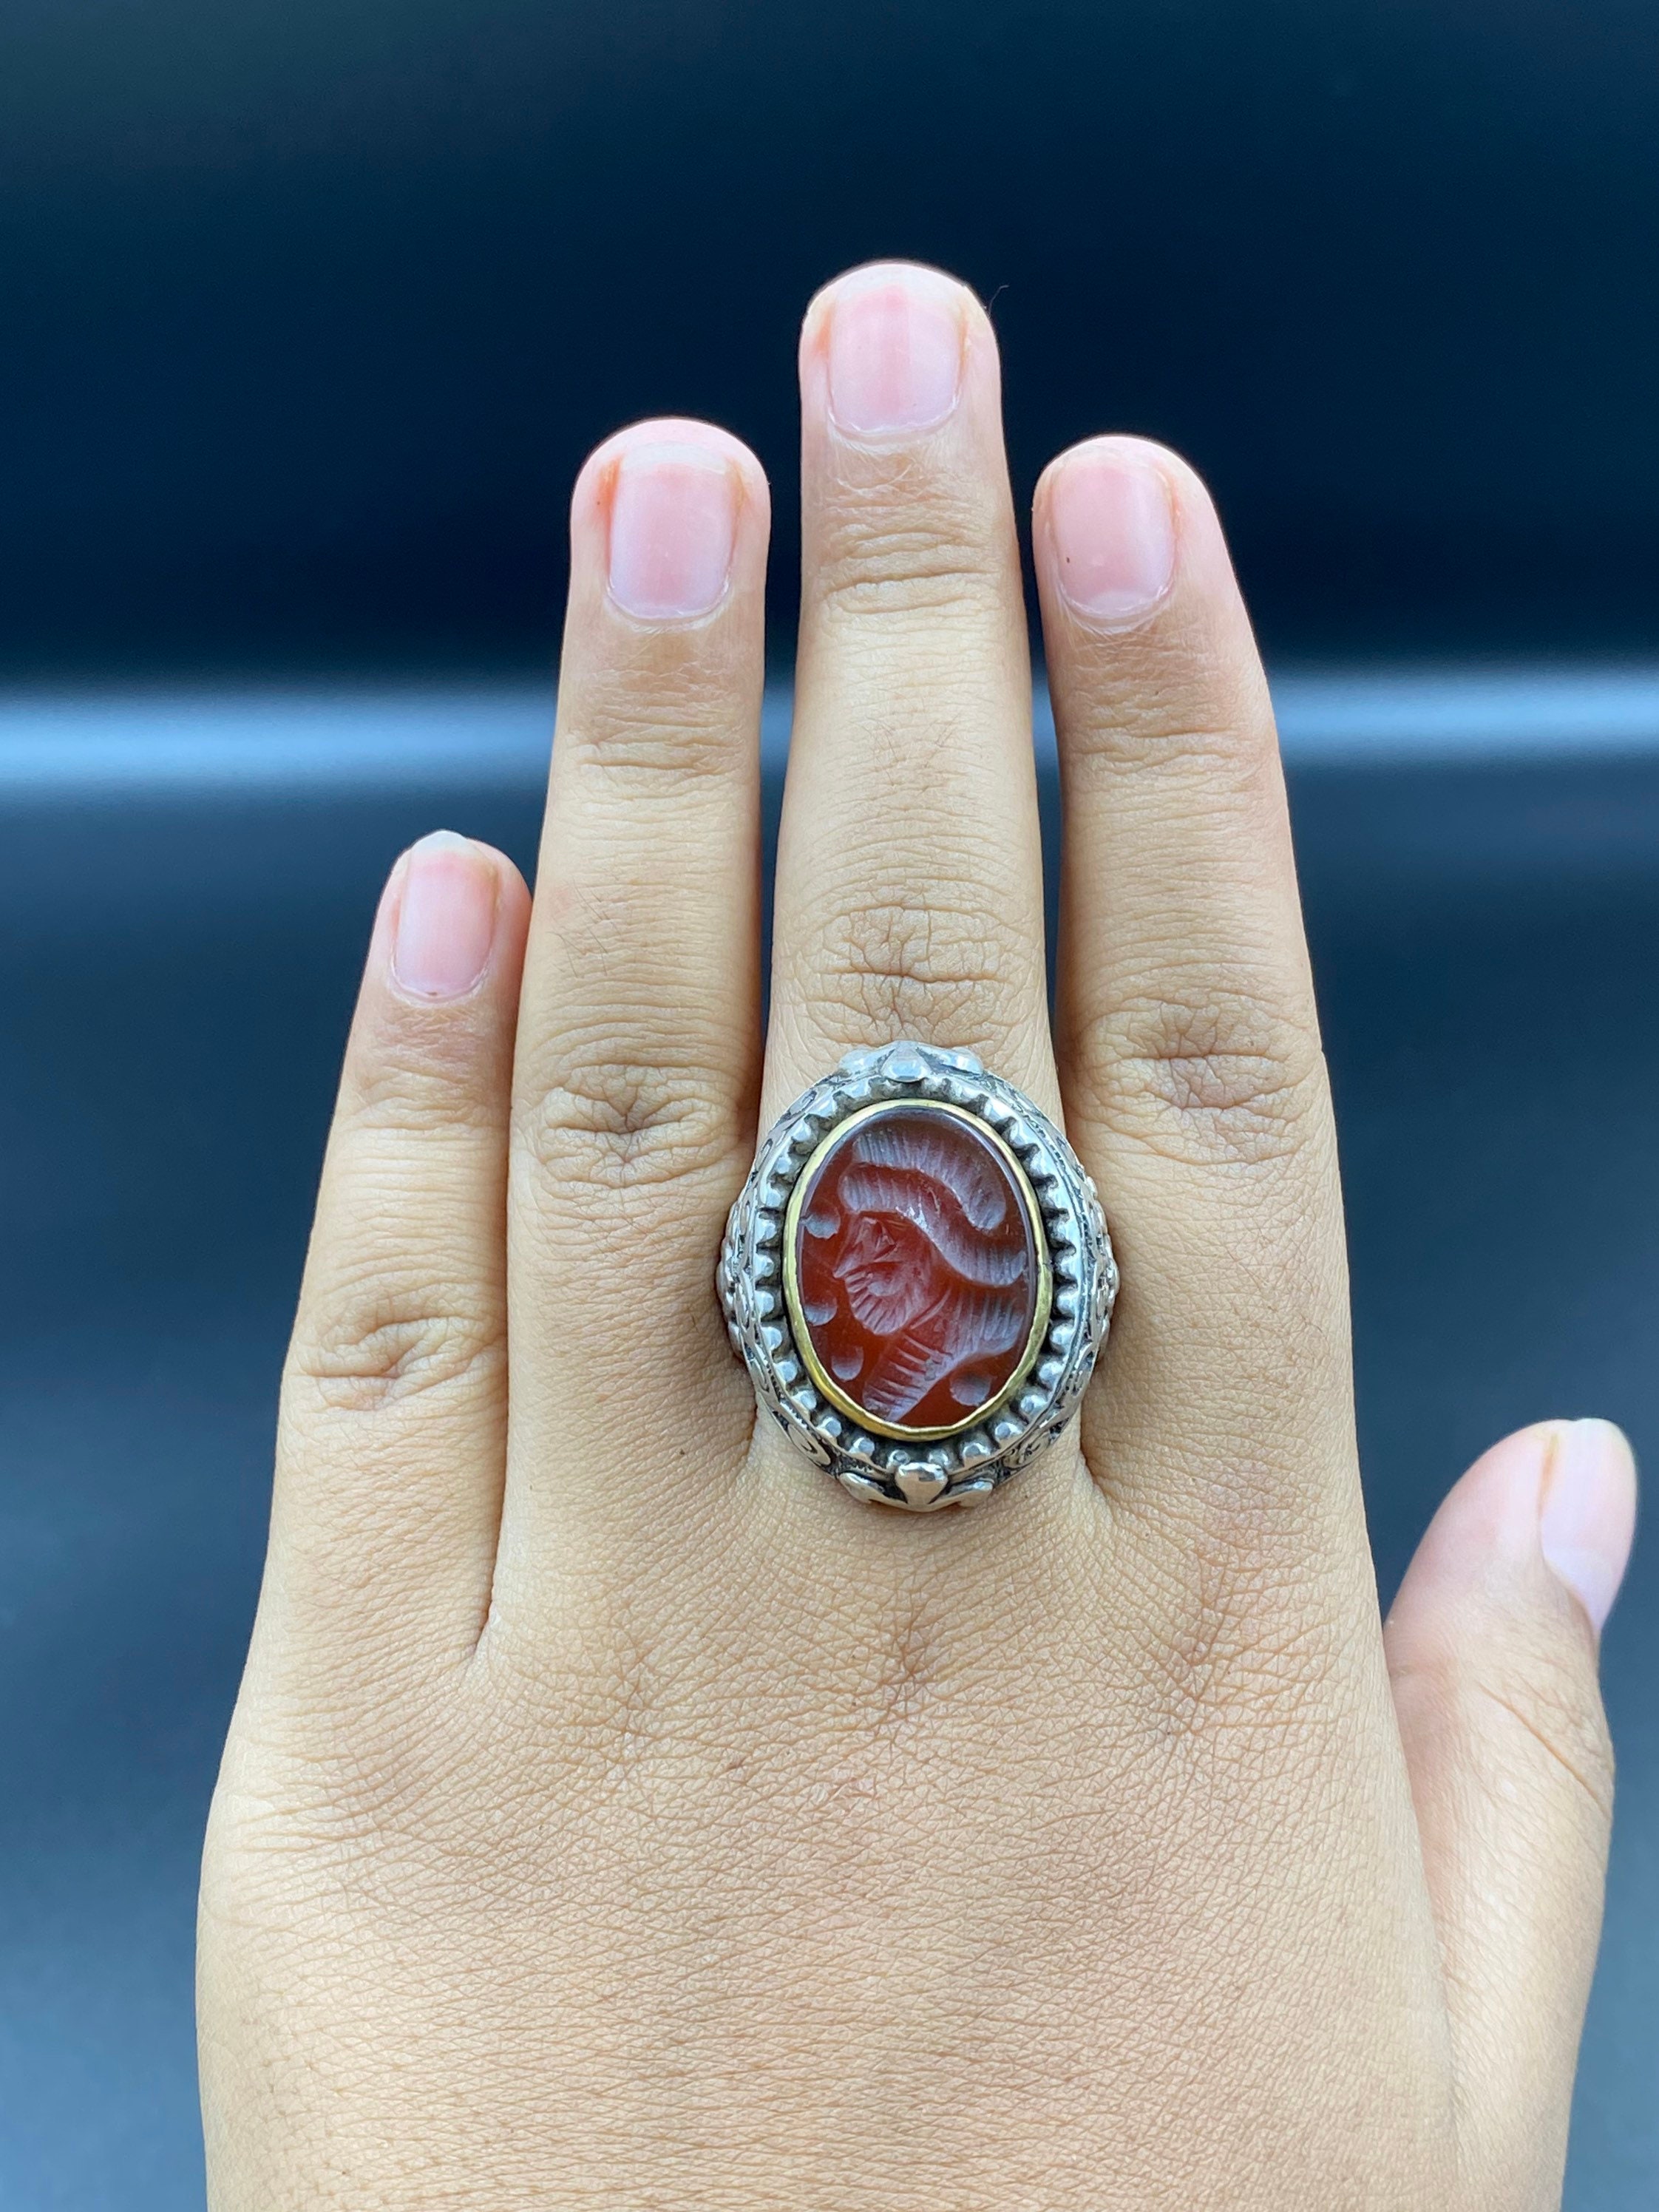 Antique” carnelian ring with cameo… : r/jewelers